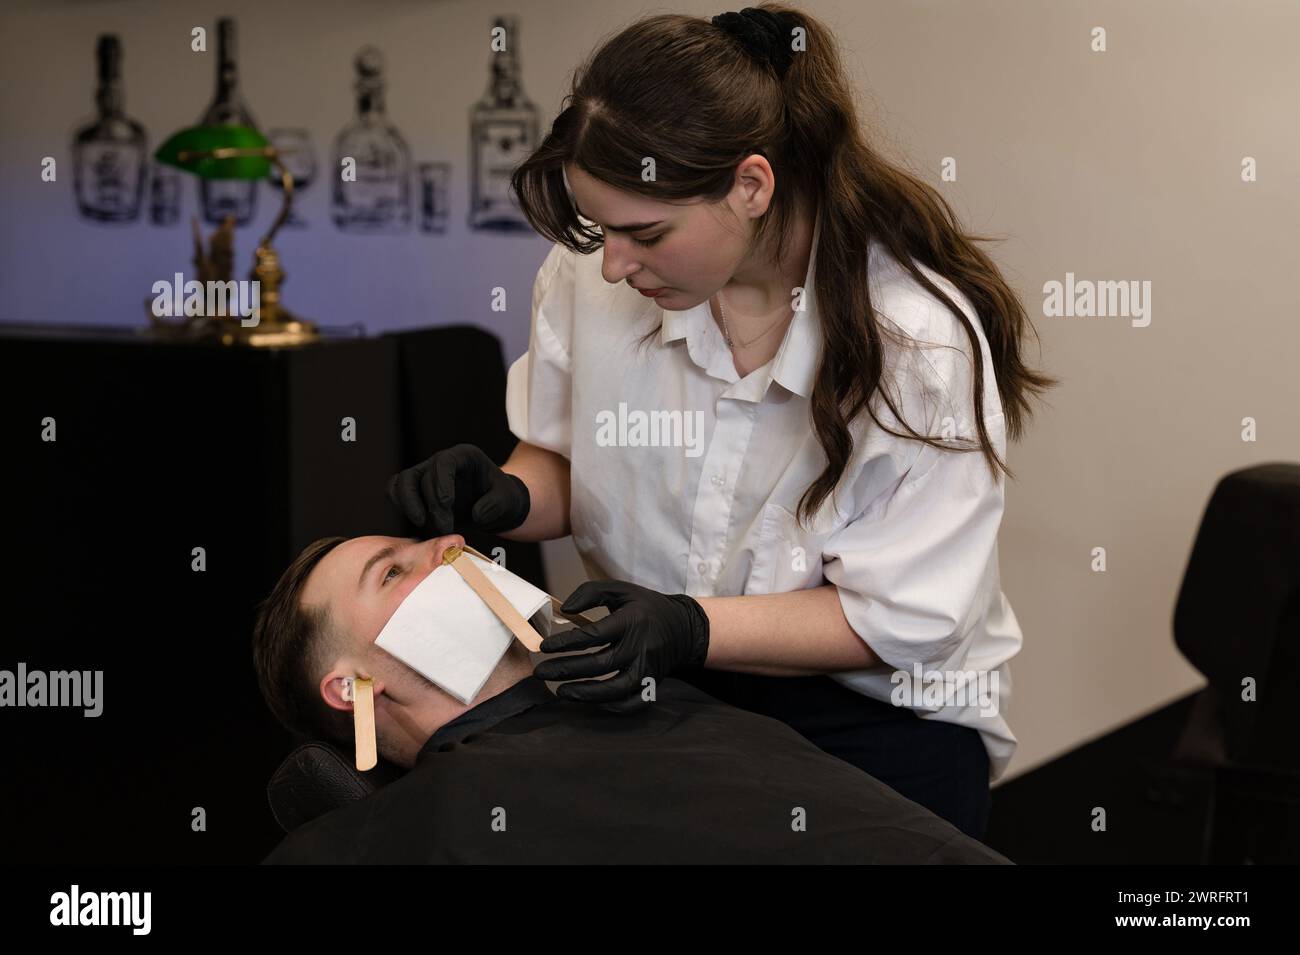 Hair removal procedure in a barbershop. Nose hair wax removal. Stock Photo